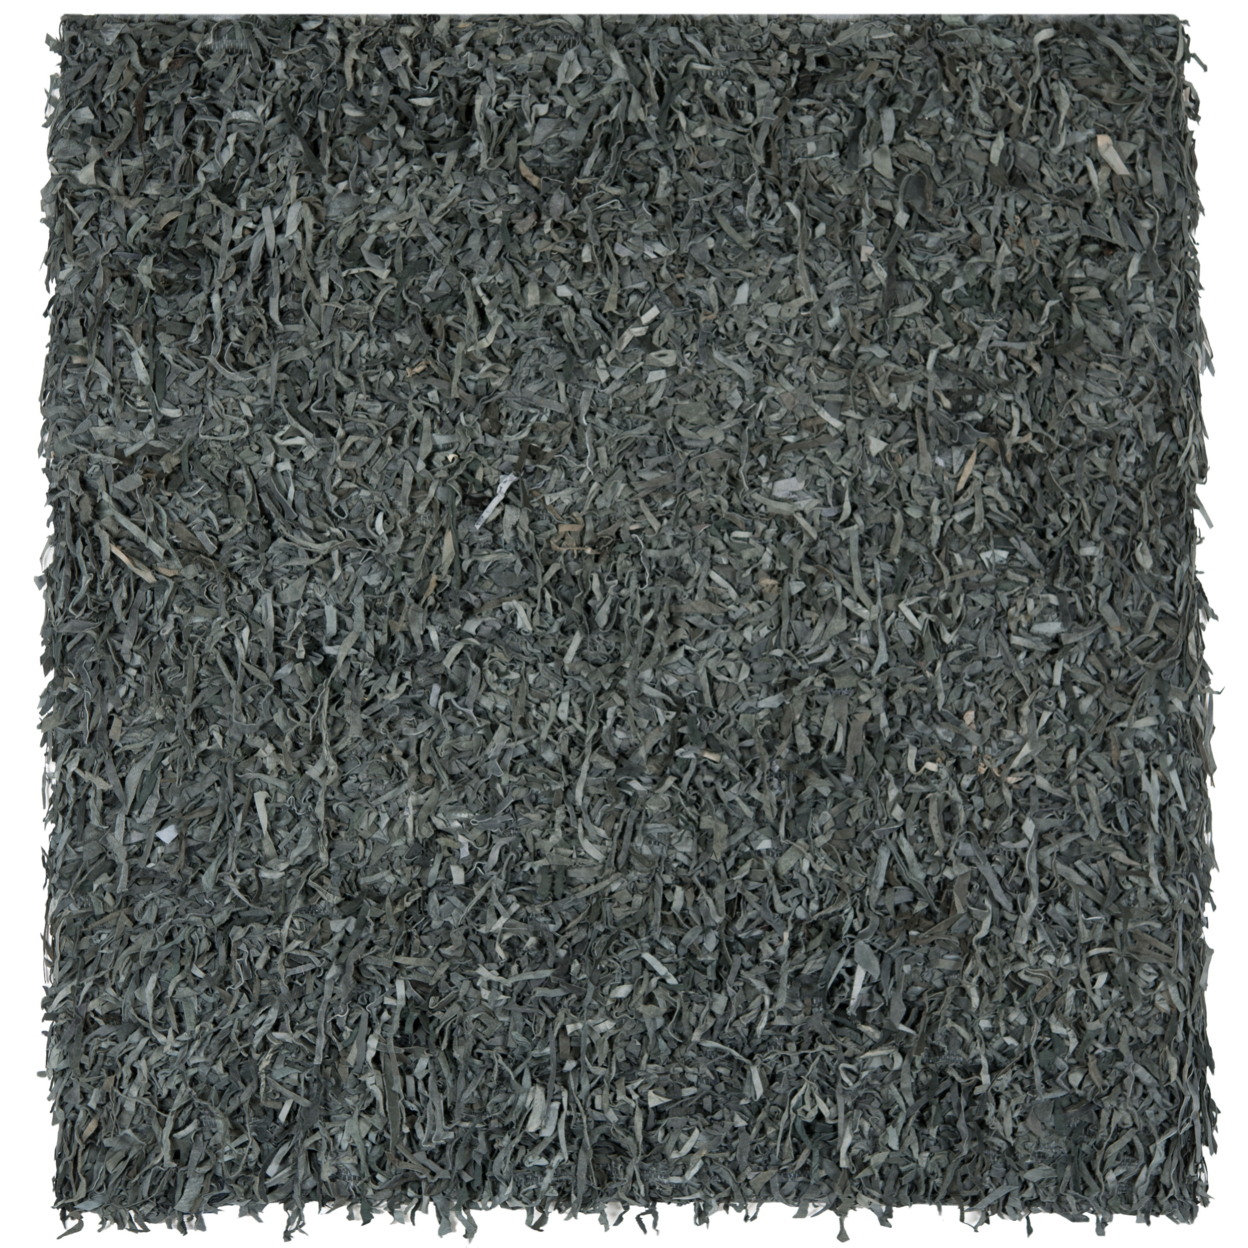 SAFAVIEH Leather Shag LSG511N Hand-knotted Grey Rug - 8' Square